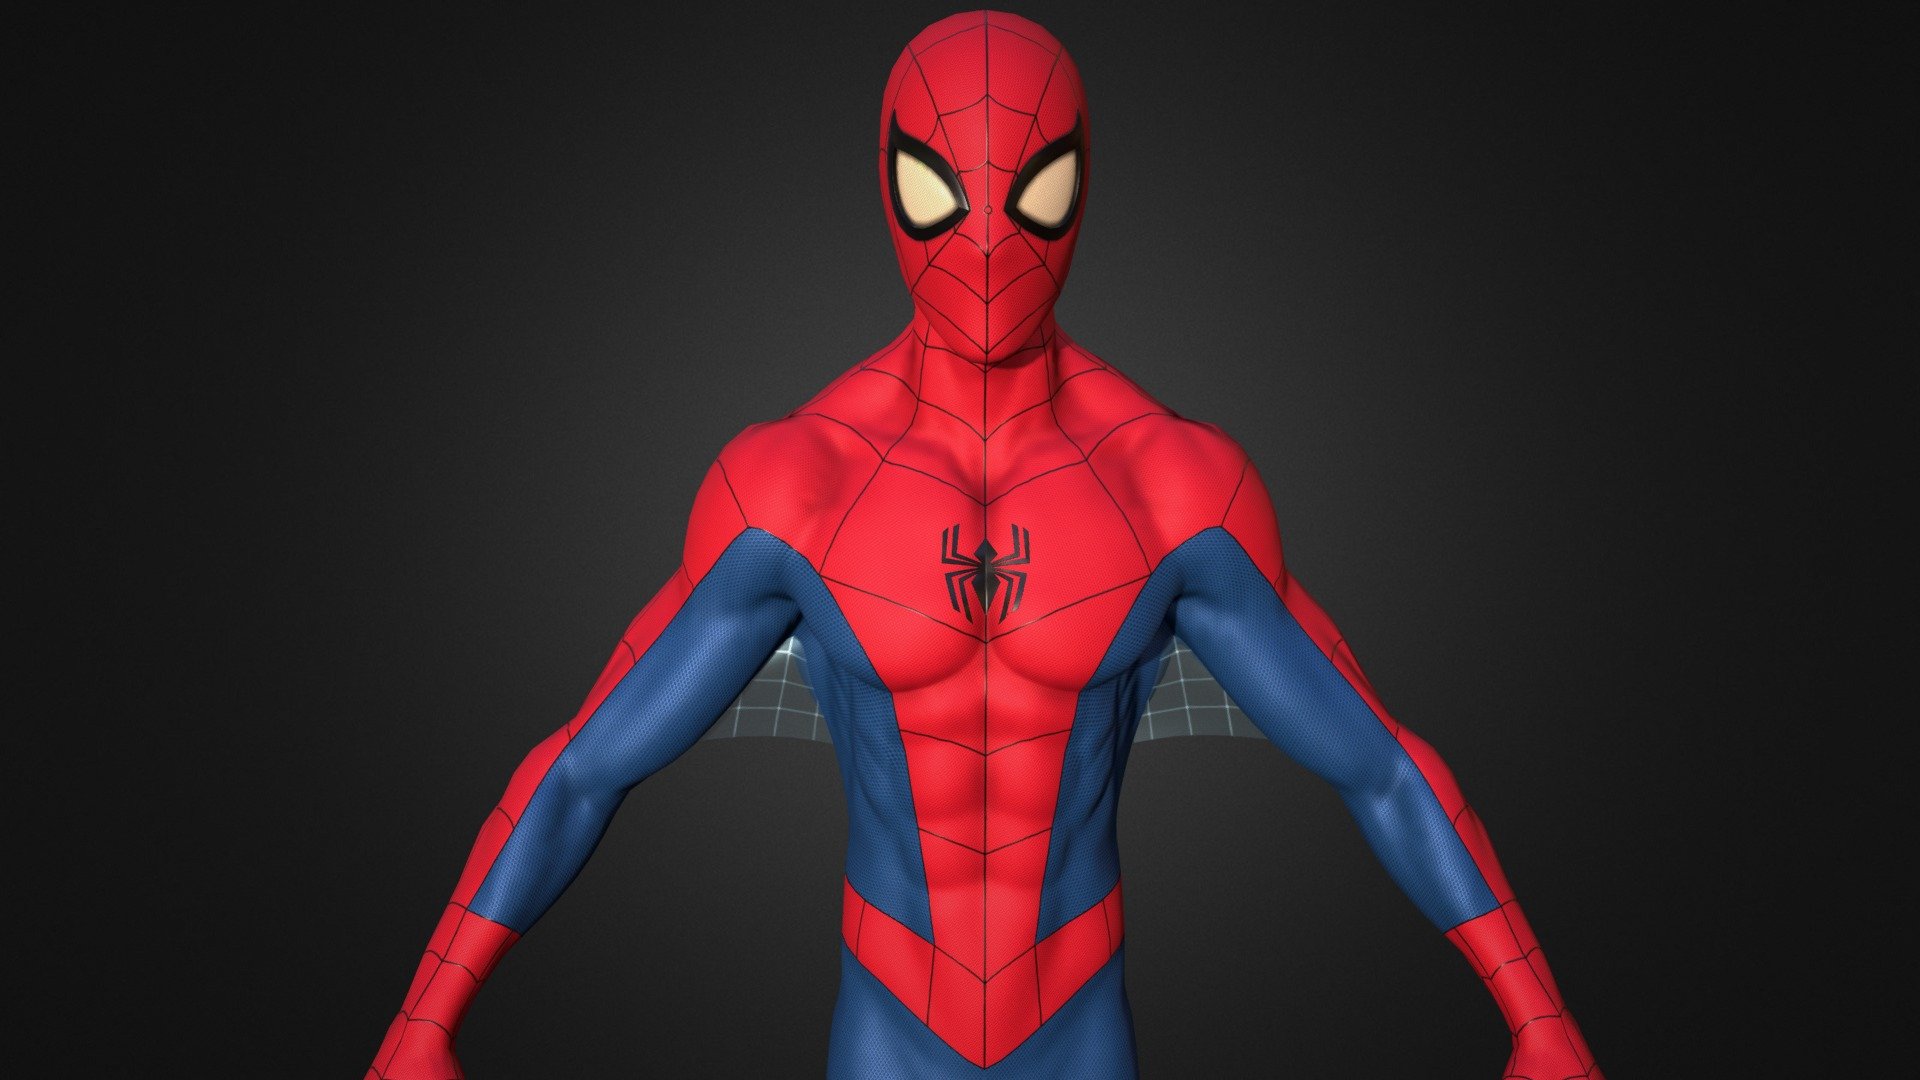 Spiderman comic books character published by Marvel Comics.




Model was made on Maya, Zbrush, substance painter and Blender . 

This model inspired by The Spectacular Spider-Man suit

The model has a  The Spectacular Spider-Man suit

High quality texture work.

The model come with complete 4k textures and BlENDER, FBX, MTL And OBJ file formats 

The model has 2 materials 1 material contains 6 maps Basecolor, Roughness,Metalness, Normal, Opacity and Ao and 2nd contains Basecolor, Roughness,Metalness, Normal, and Ao

All textures and materials are included and mapped. (4k resoulutions)

No special plugin needed to open scene

The model can be rigg easily
 - Spectacular Spider-man - Buy Royalty Free 3D model by AFSHAN ALI (@Aliflex) 3d model